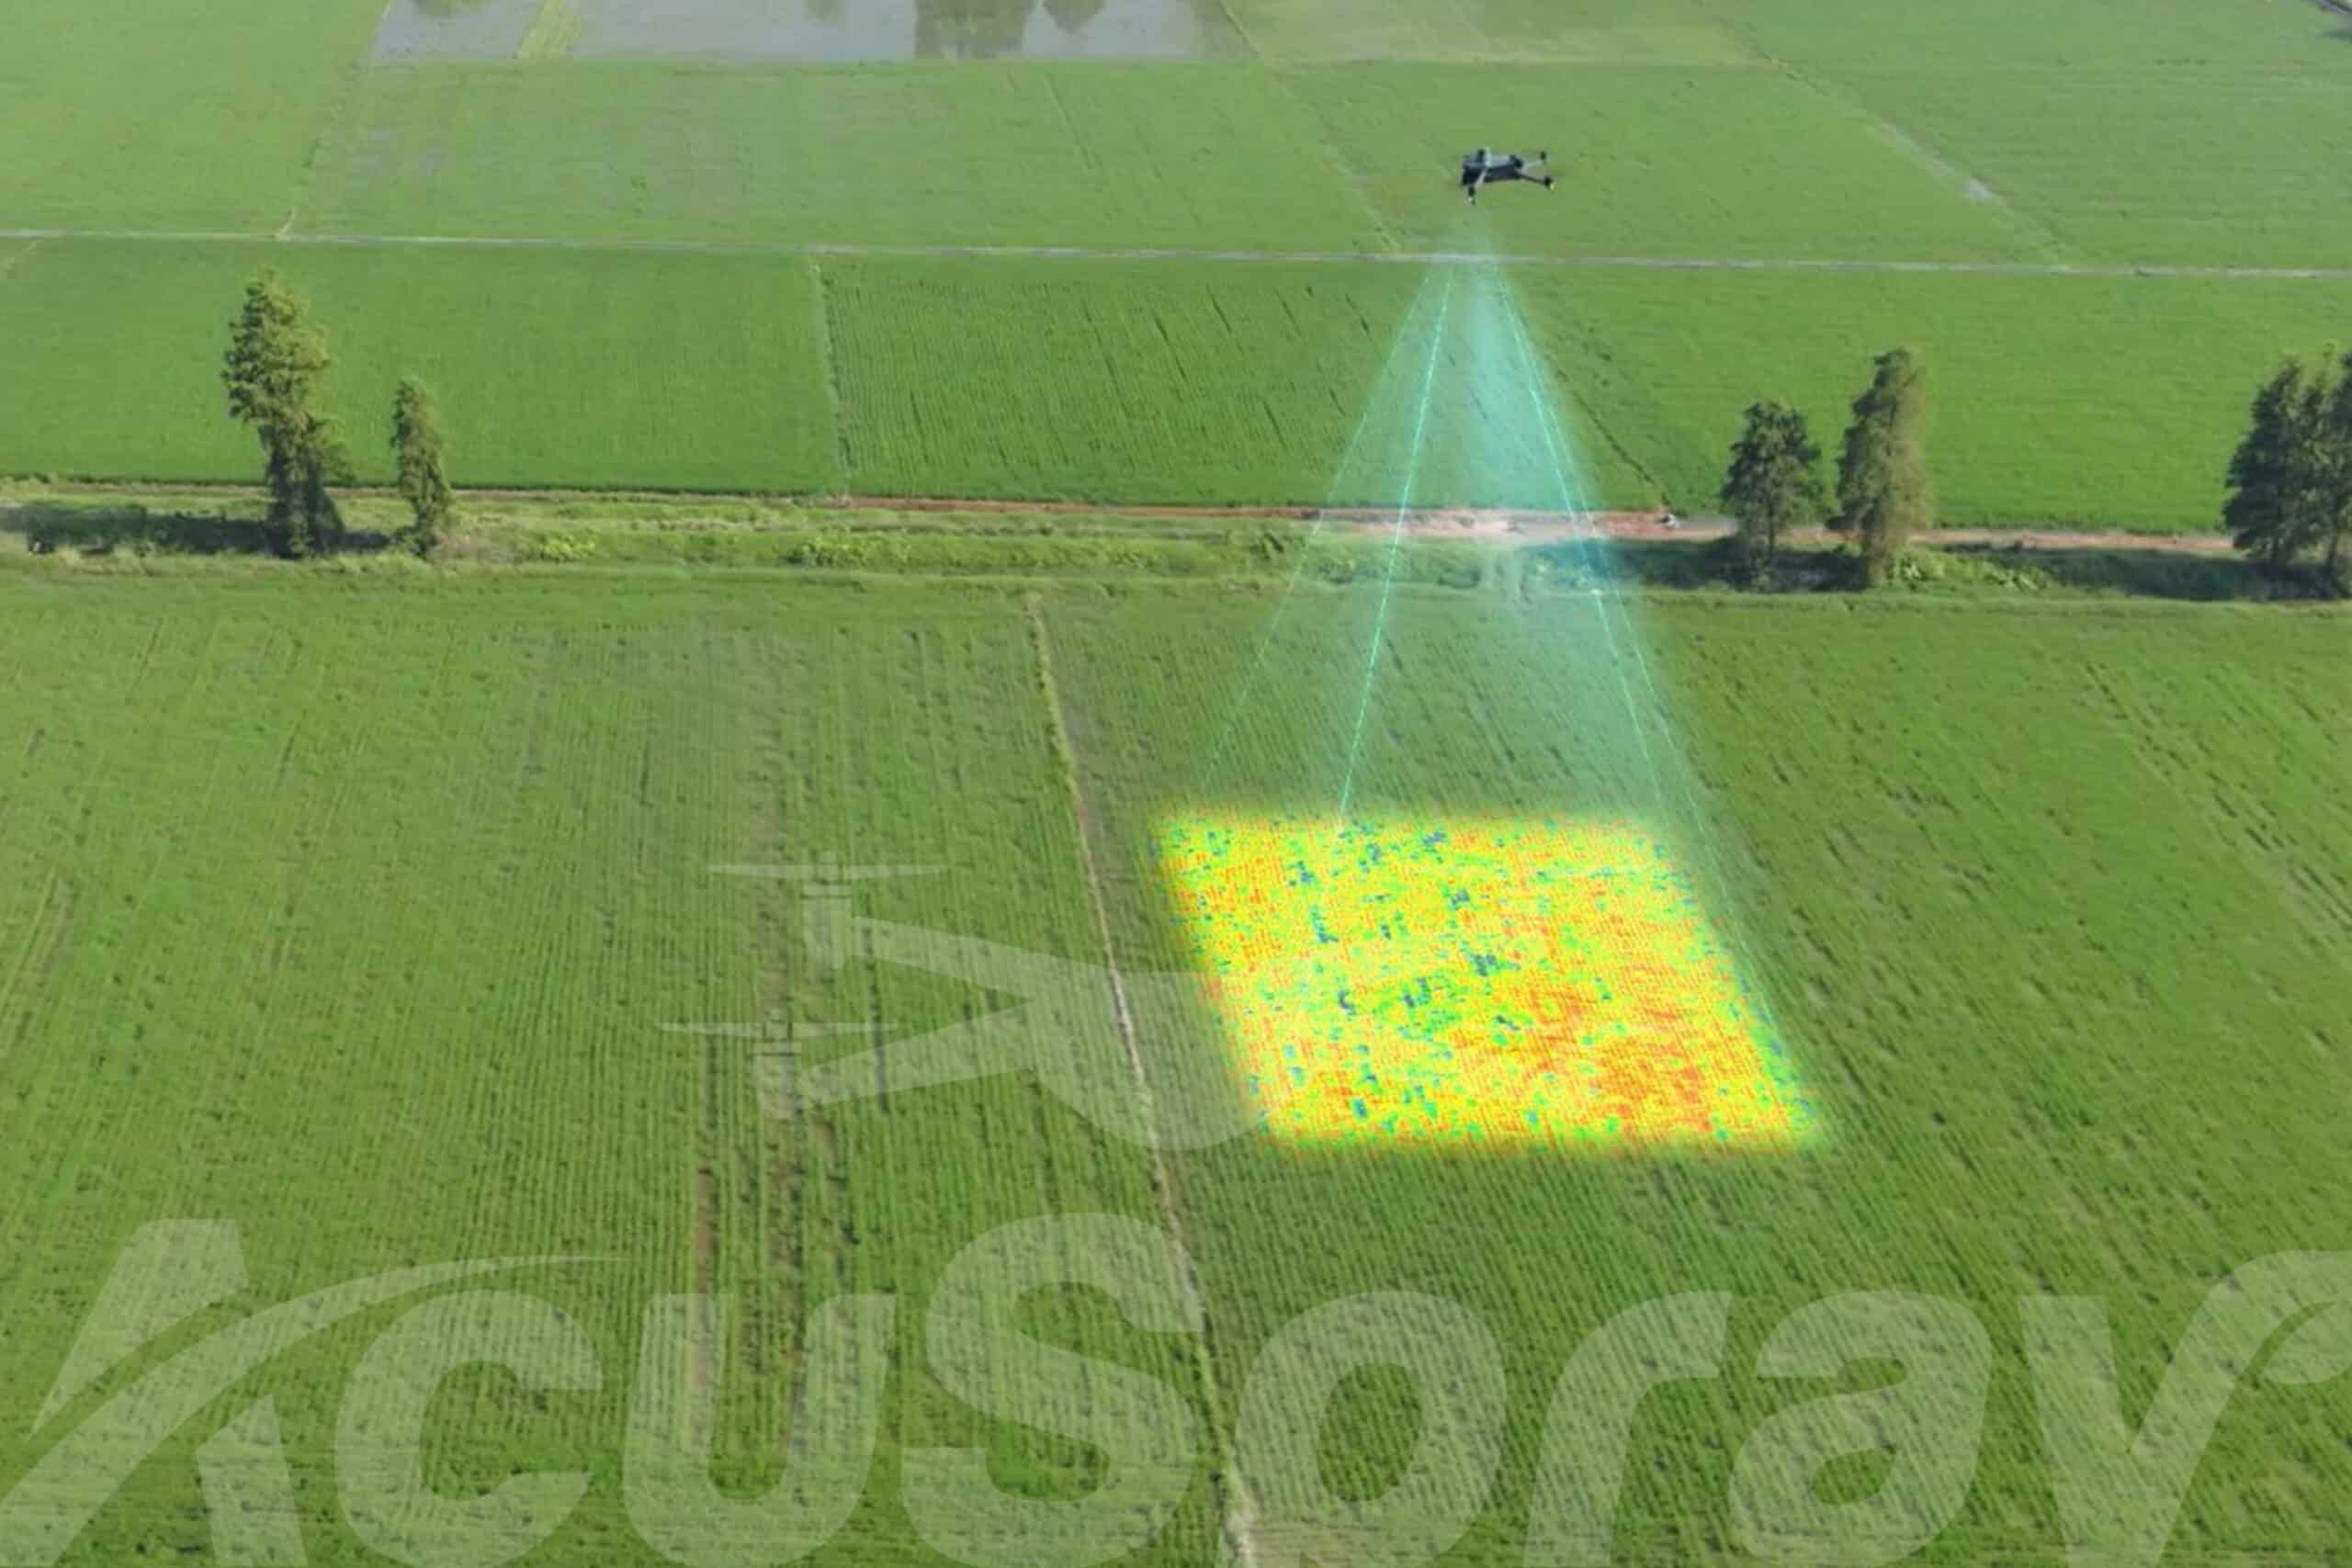 A drone equipped with multispectral imaging technology flying over an agricultural field, projecting a multicolored image that indicates varying crop health conditions.